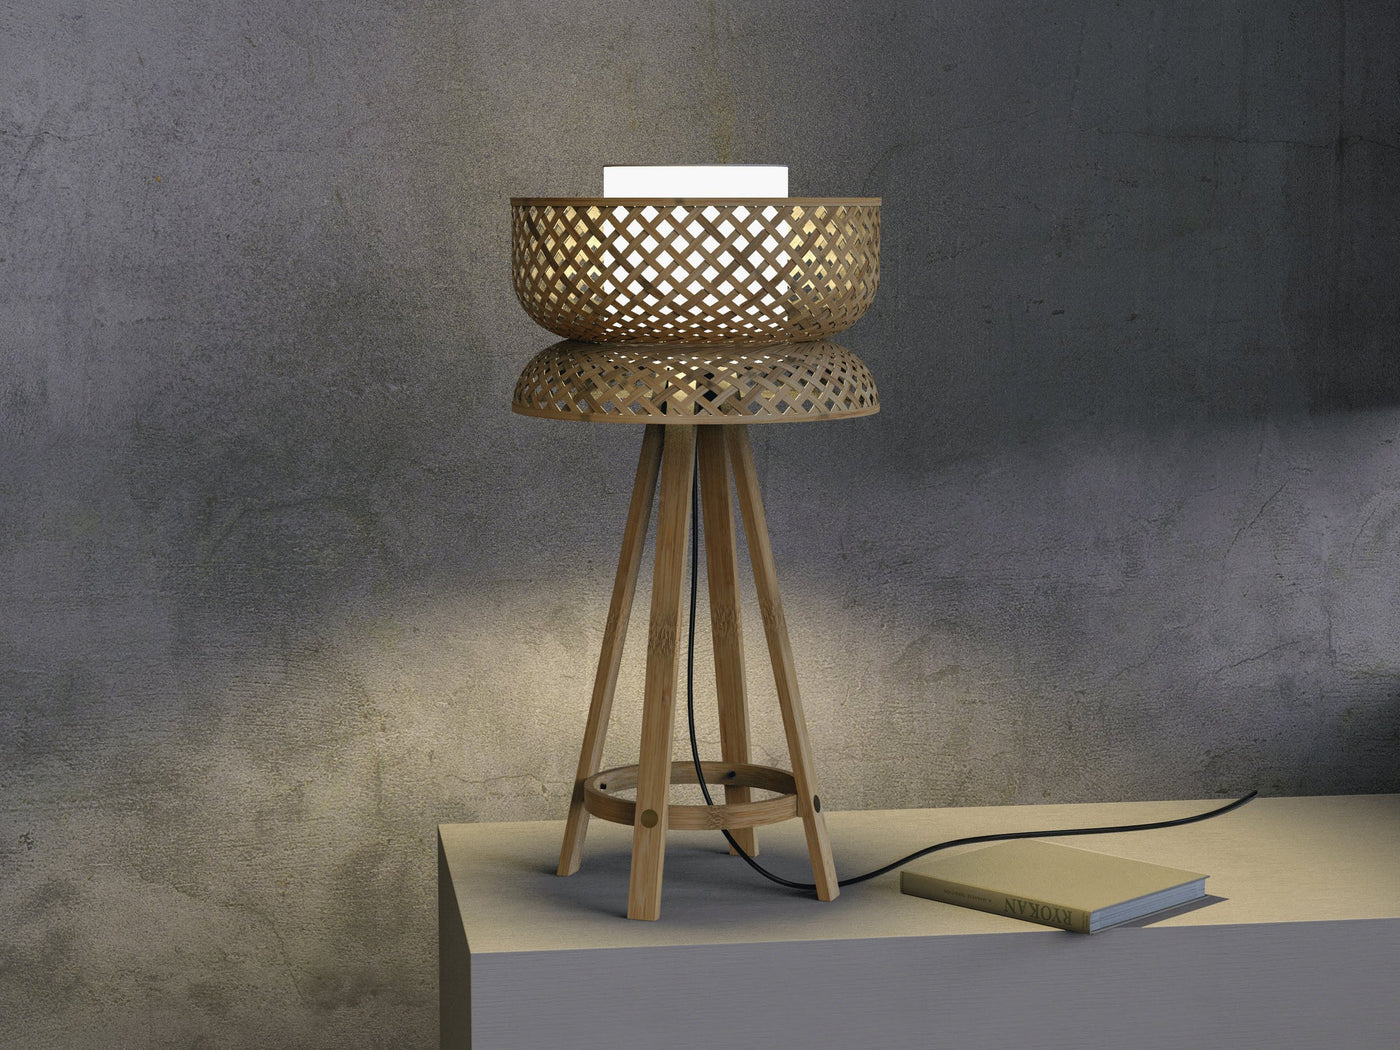 Lotus Bamboo Table Lamp-Lighting-BAMBOO, BAMBOO LIGHTS-Forest Homes-Nature inspired decor-Nature decor